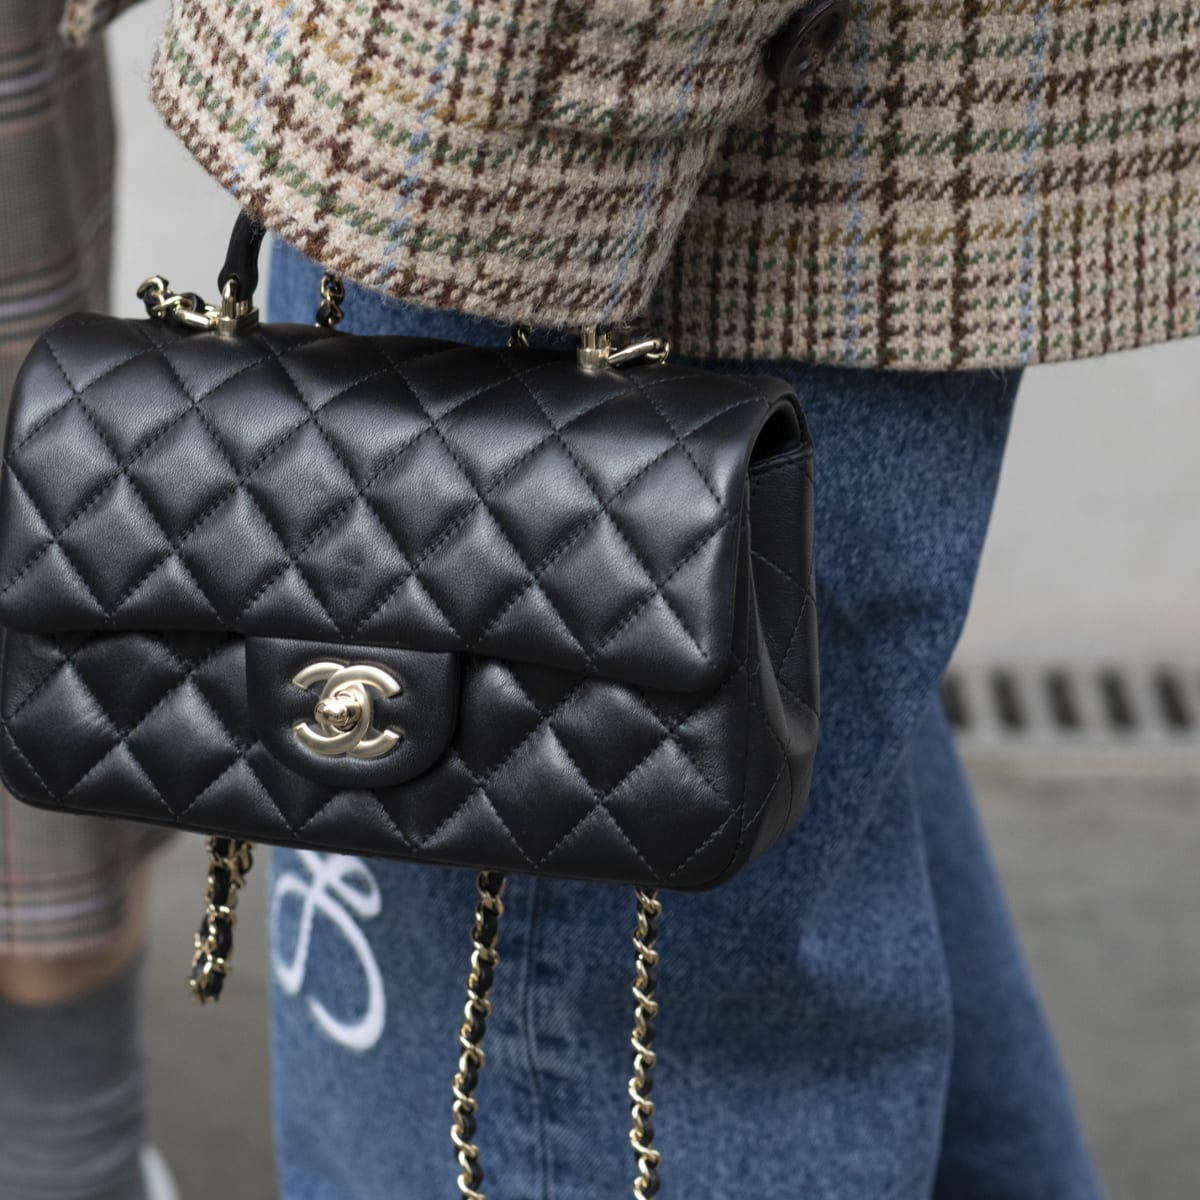 average price of a chanel bag